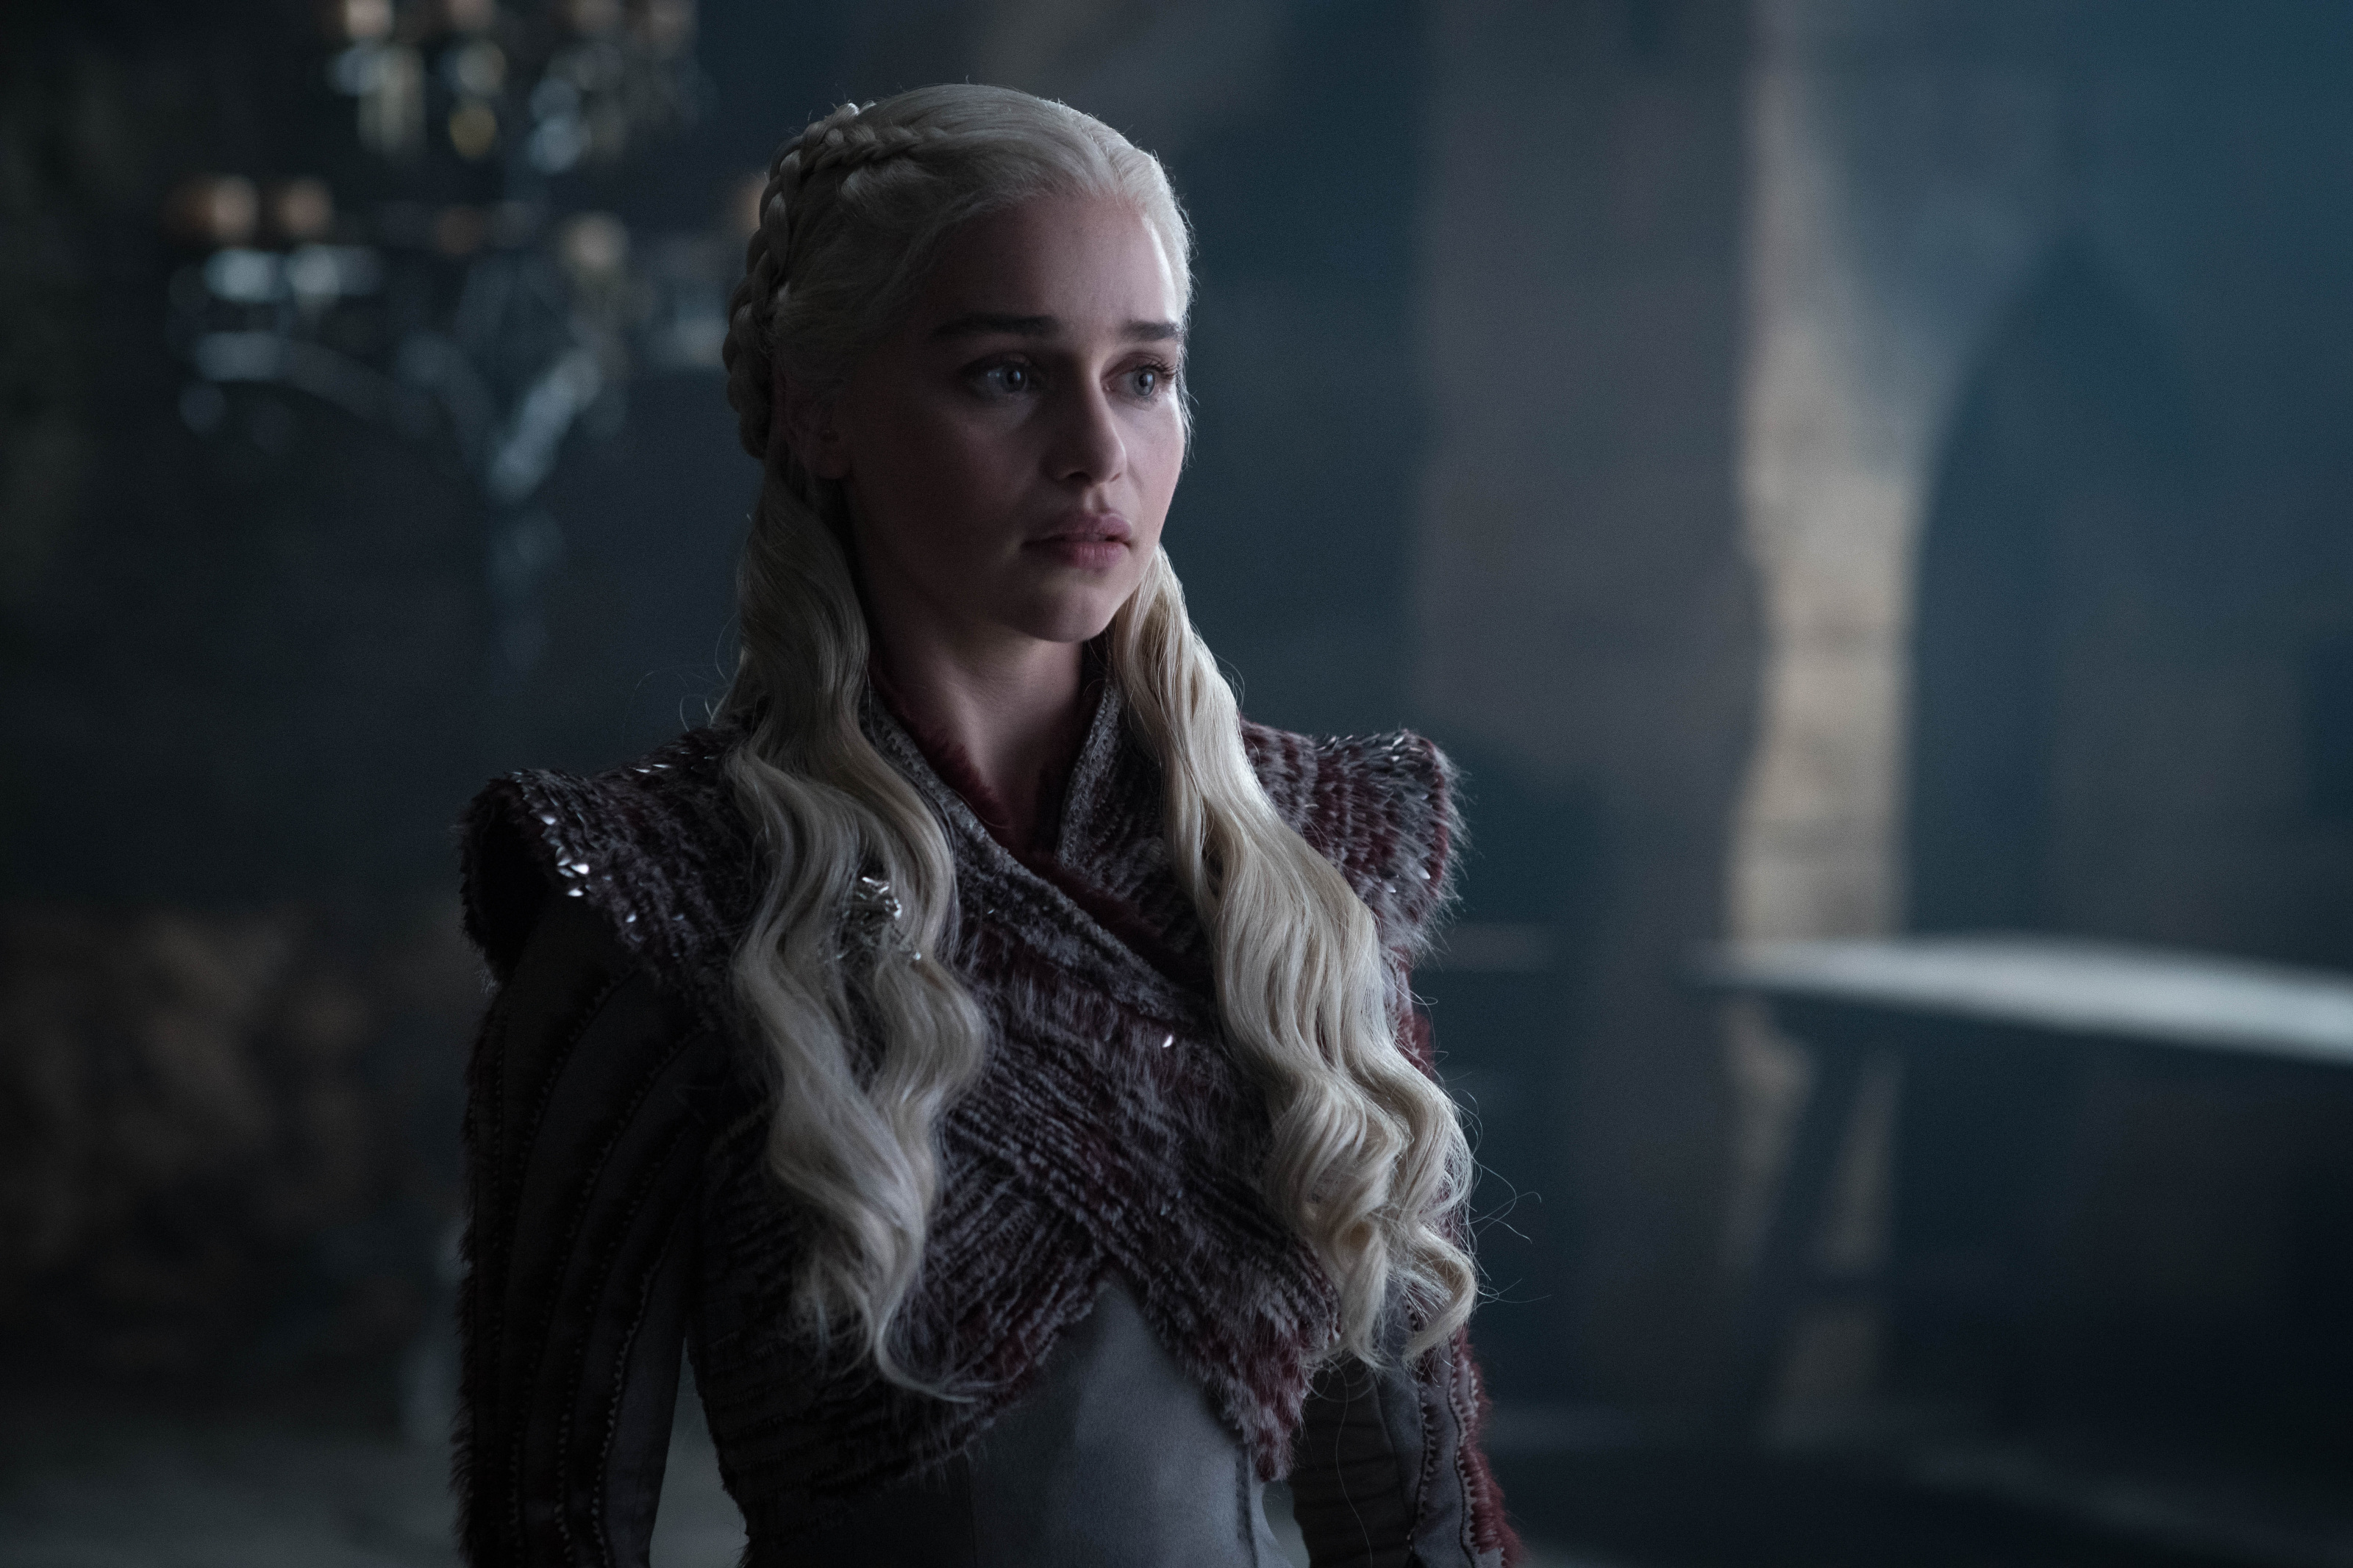 The Best 'Game of Thrones' Characters, Ranked